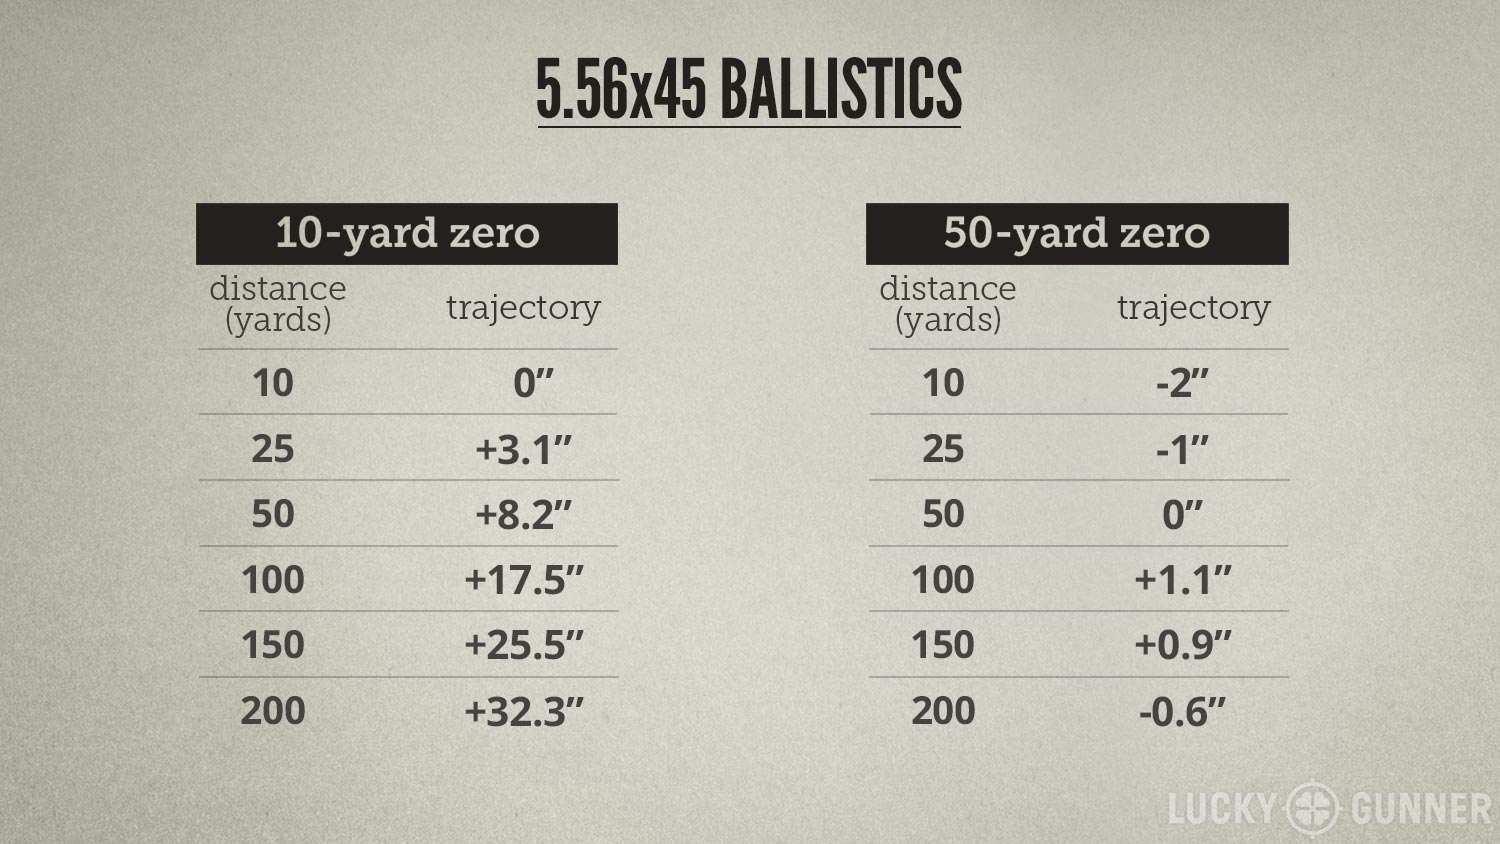 Frank proctor uses a 50 zero at 10 yards, please like, share, and comment. 